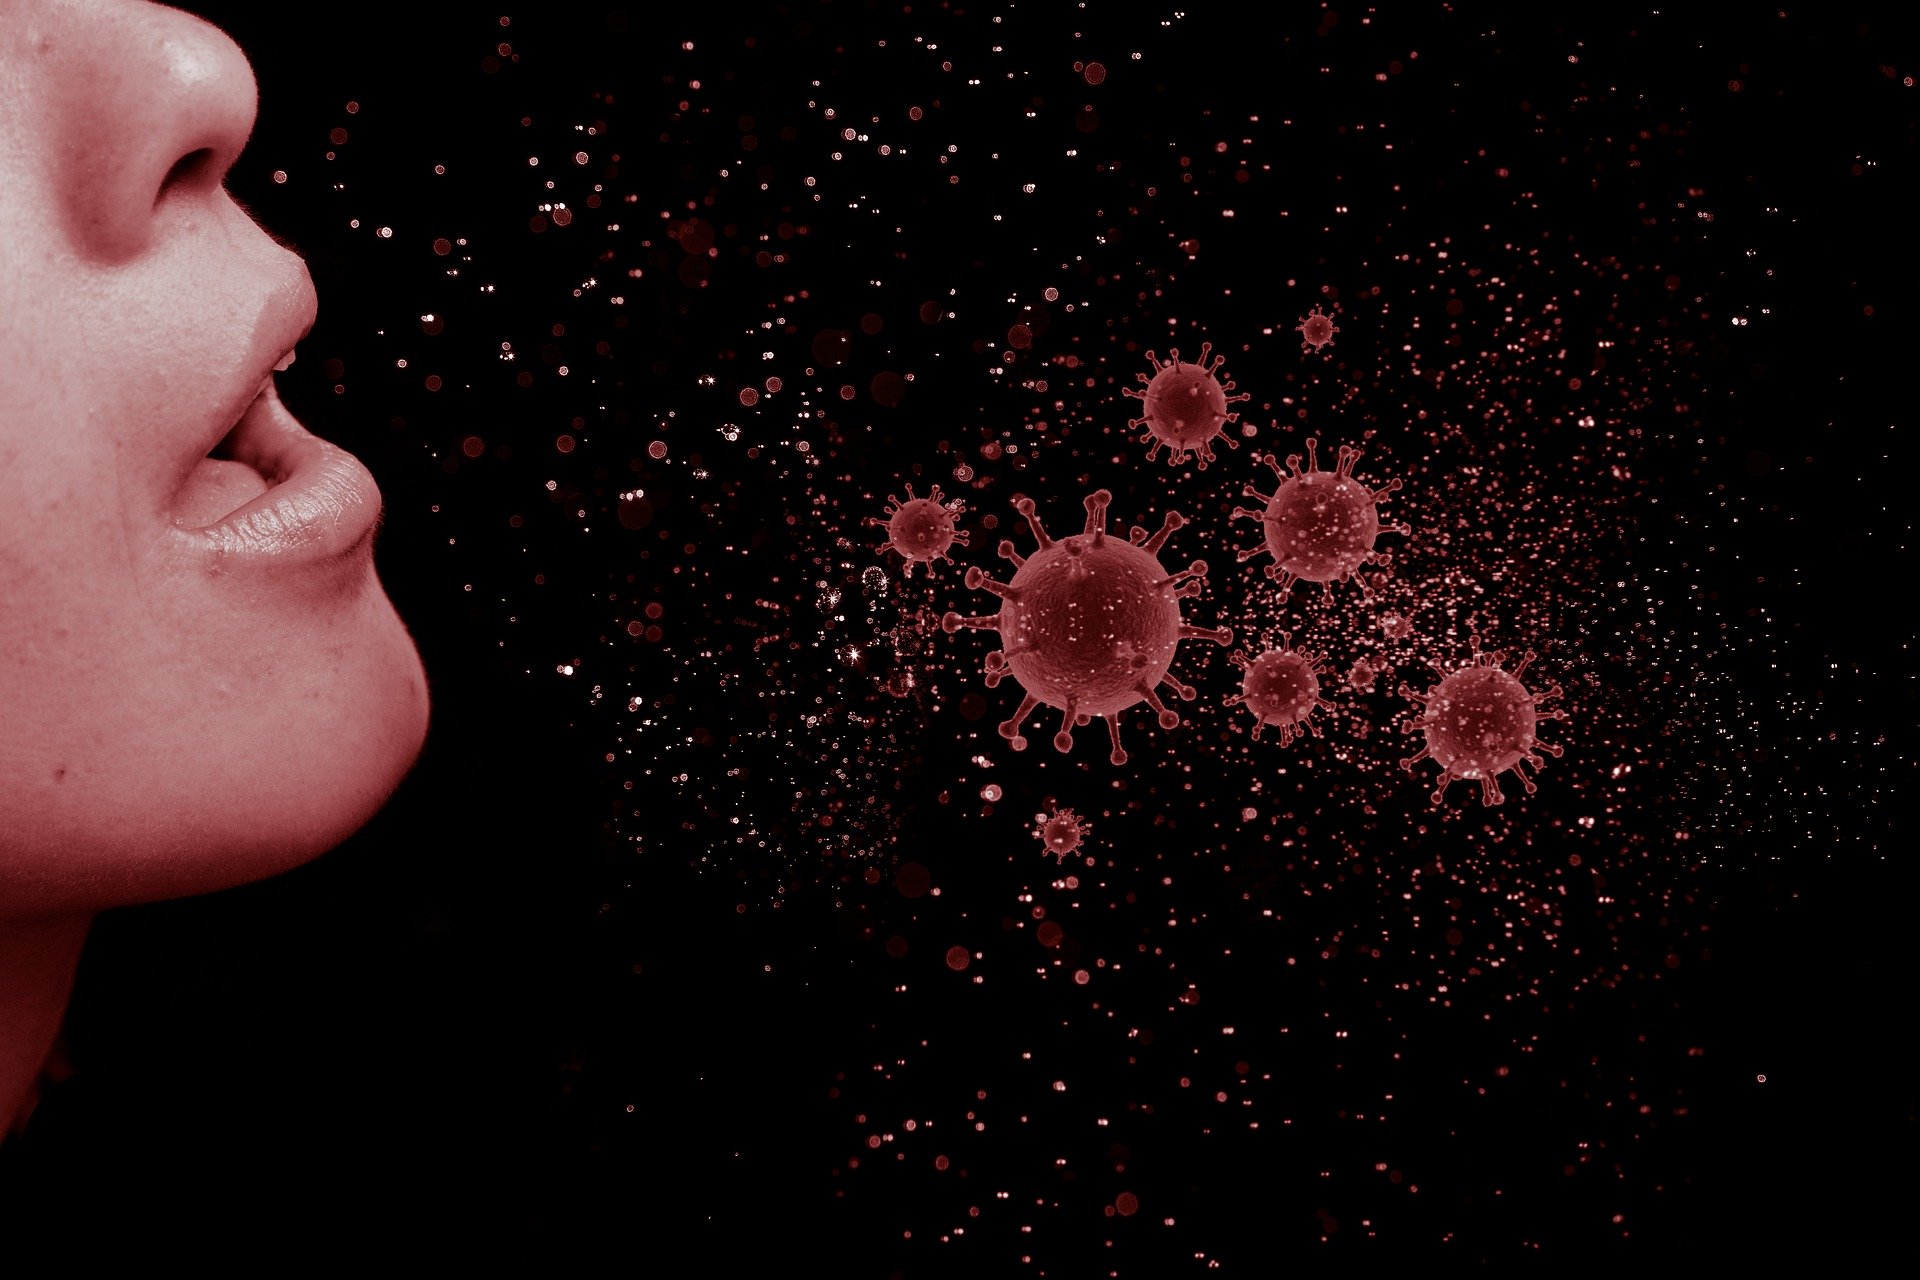 Loud talking could leave coronavirus in the air for up to 14 minutes | MIT Technology Review